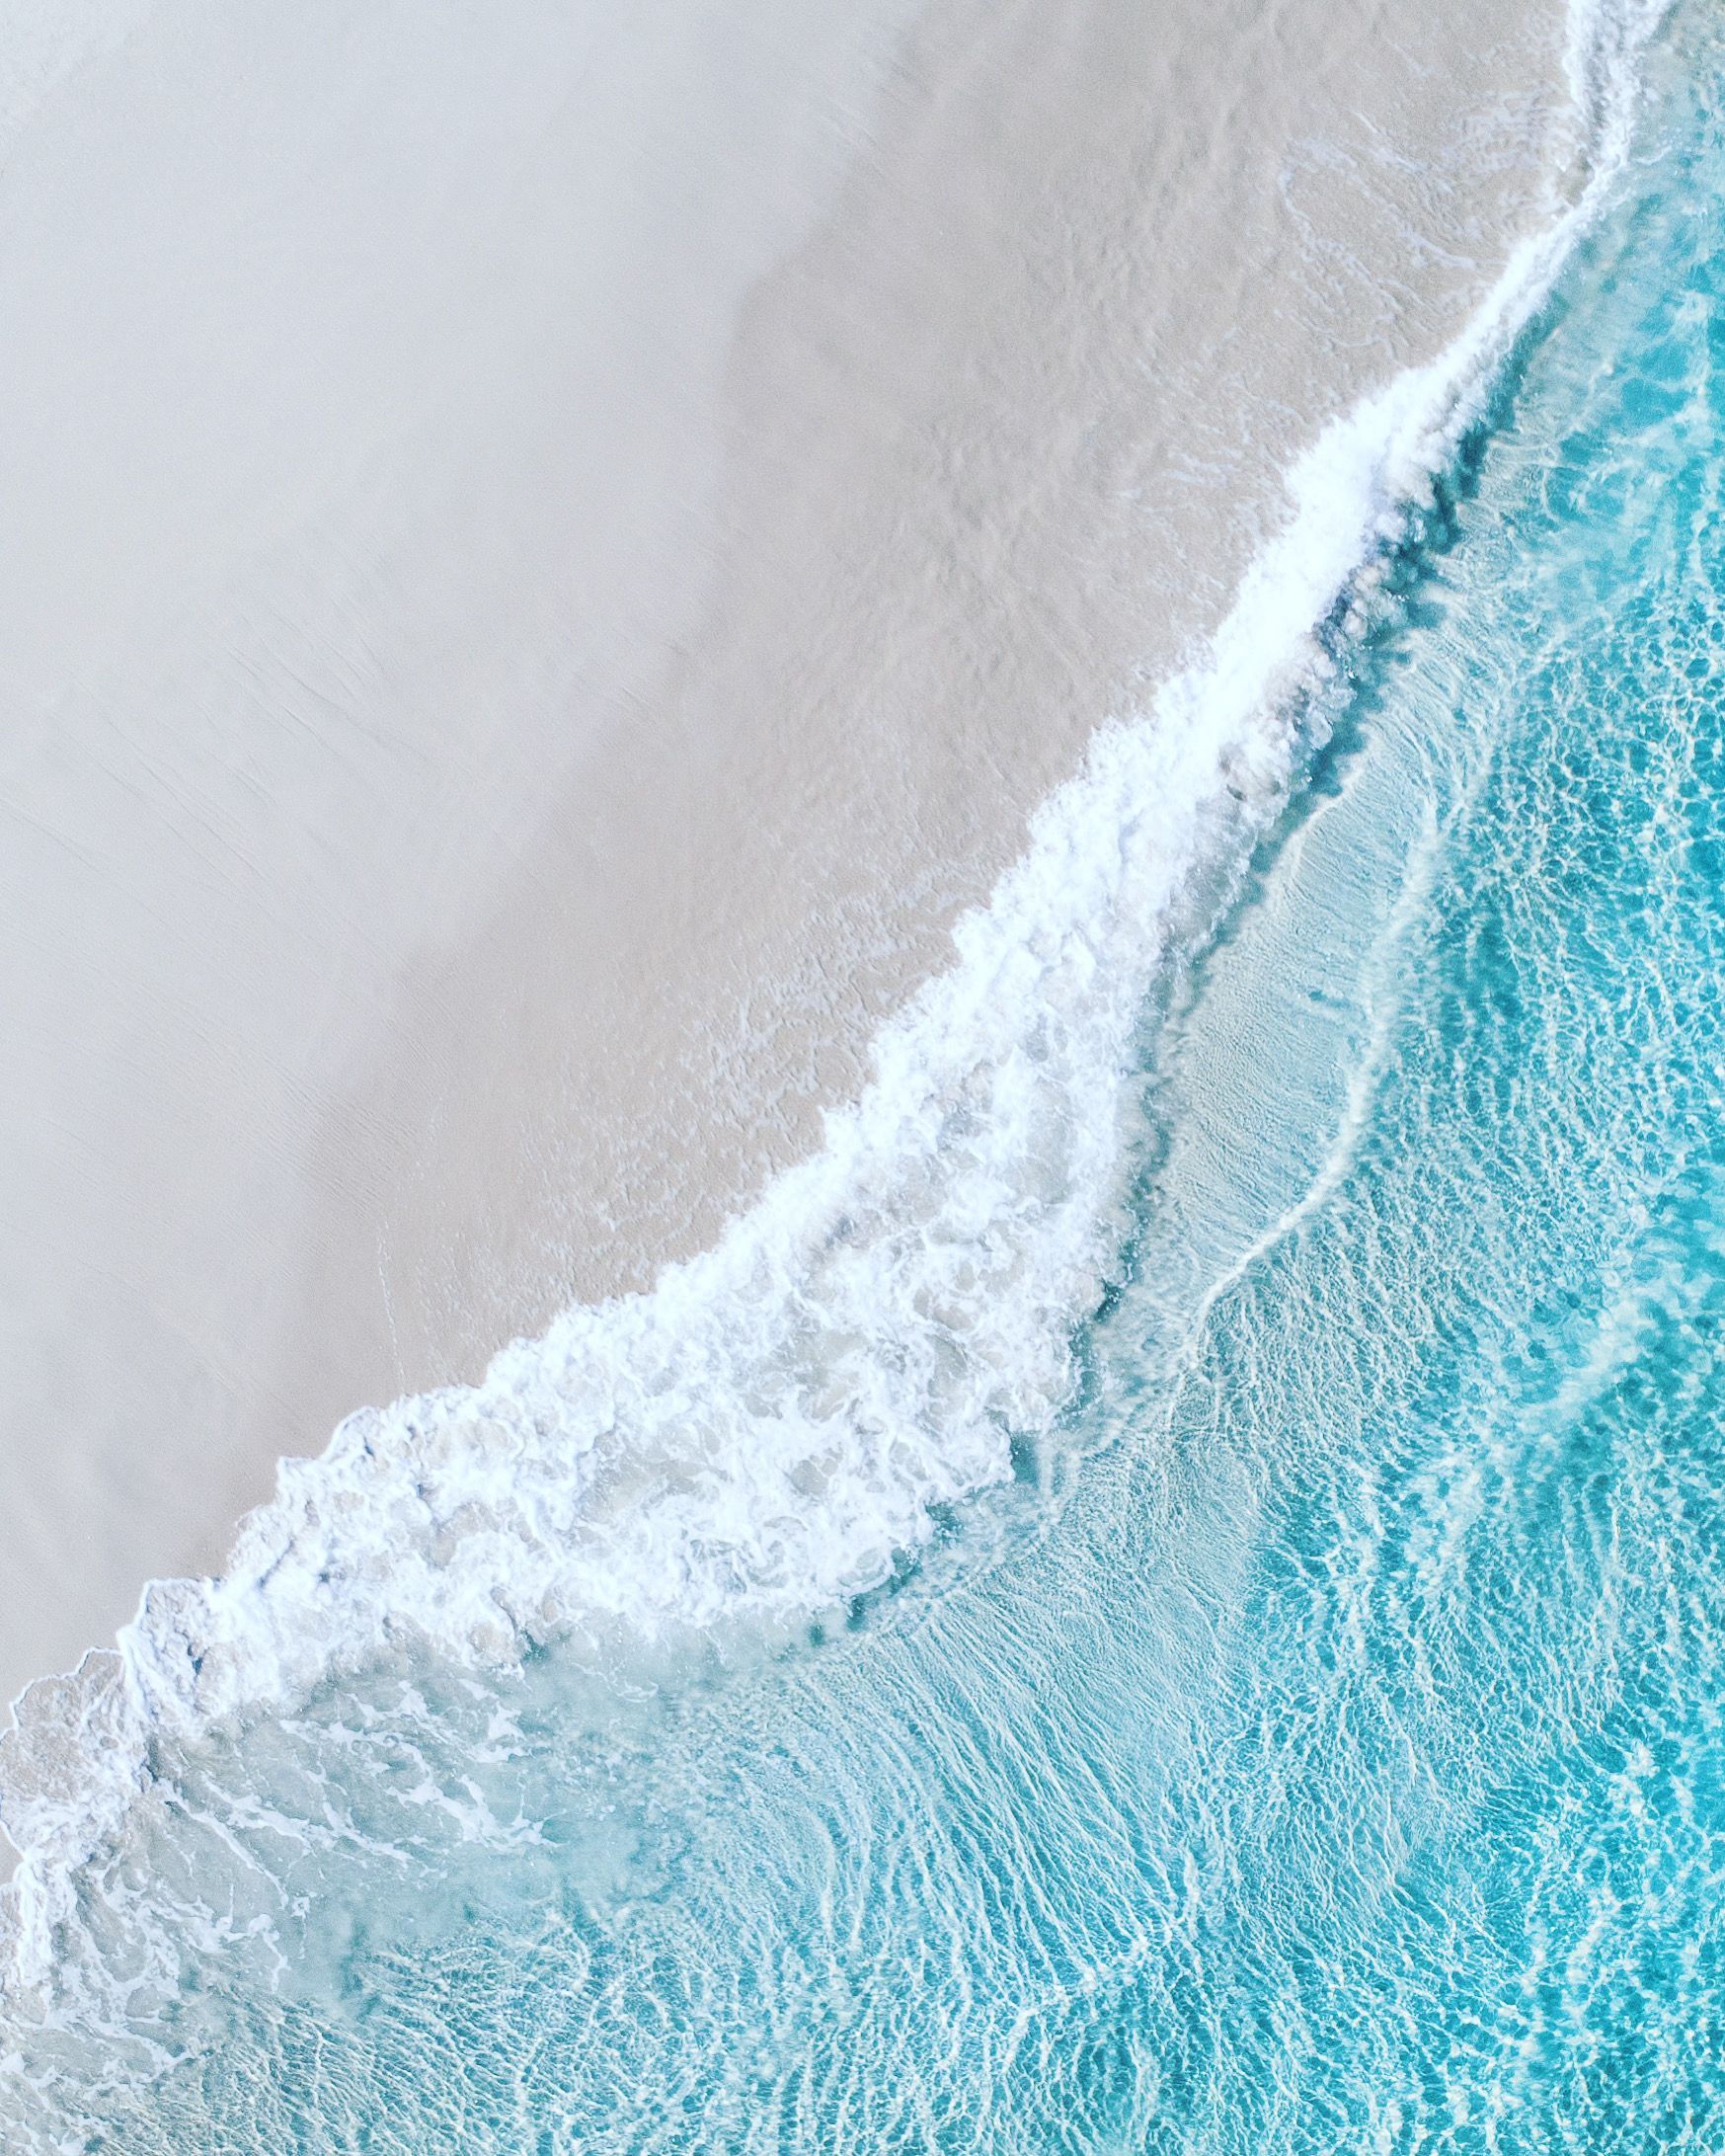 Free download Esperance From Above Light blue aesthetic Artsy beach picture [1747x2183] for your Desktop, Mobile & Tablet. Explore Light Blue Ocean Wallpaper. Blue Ocean Wallpaper, Ocean Blue Background